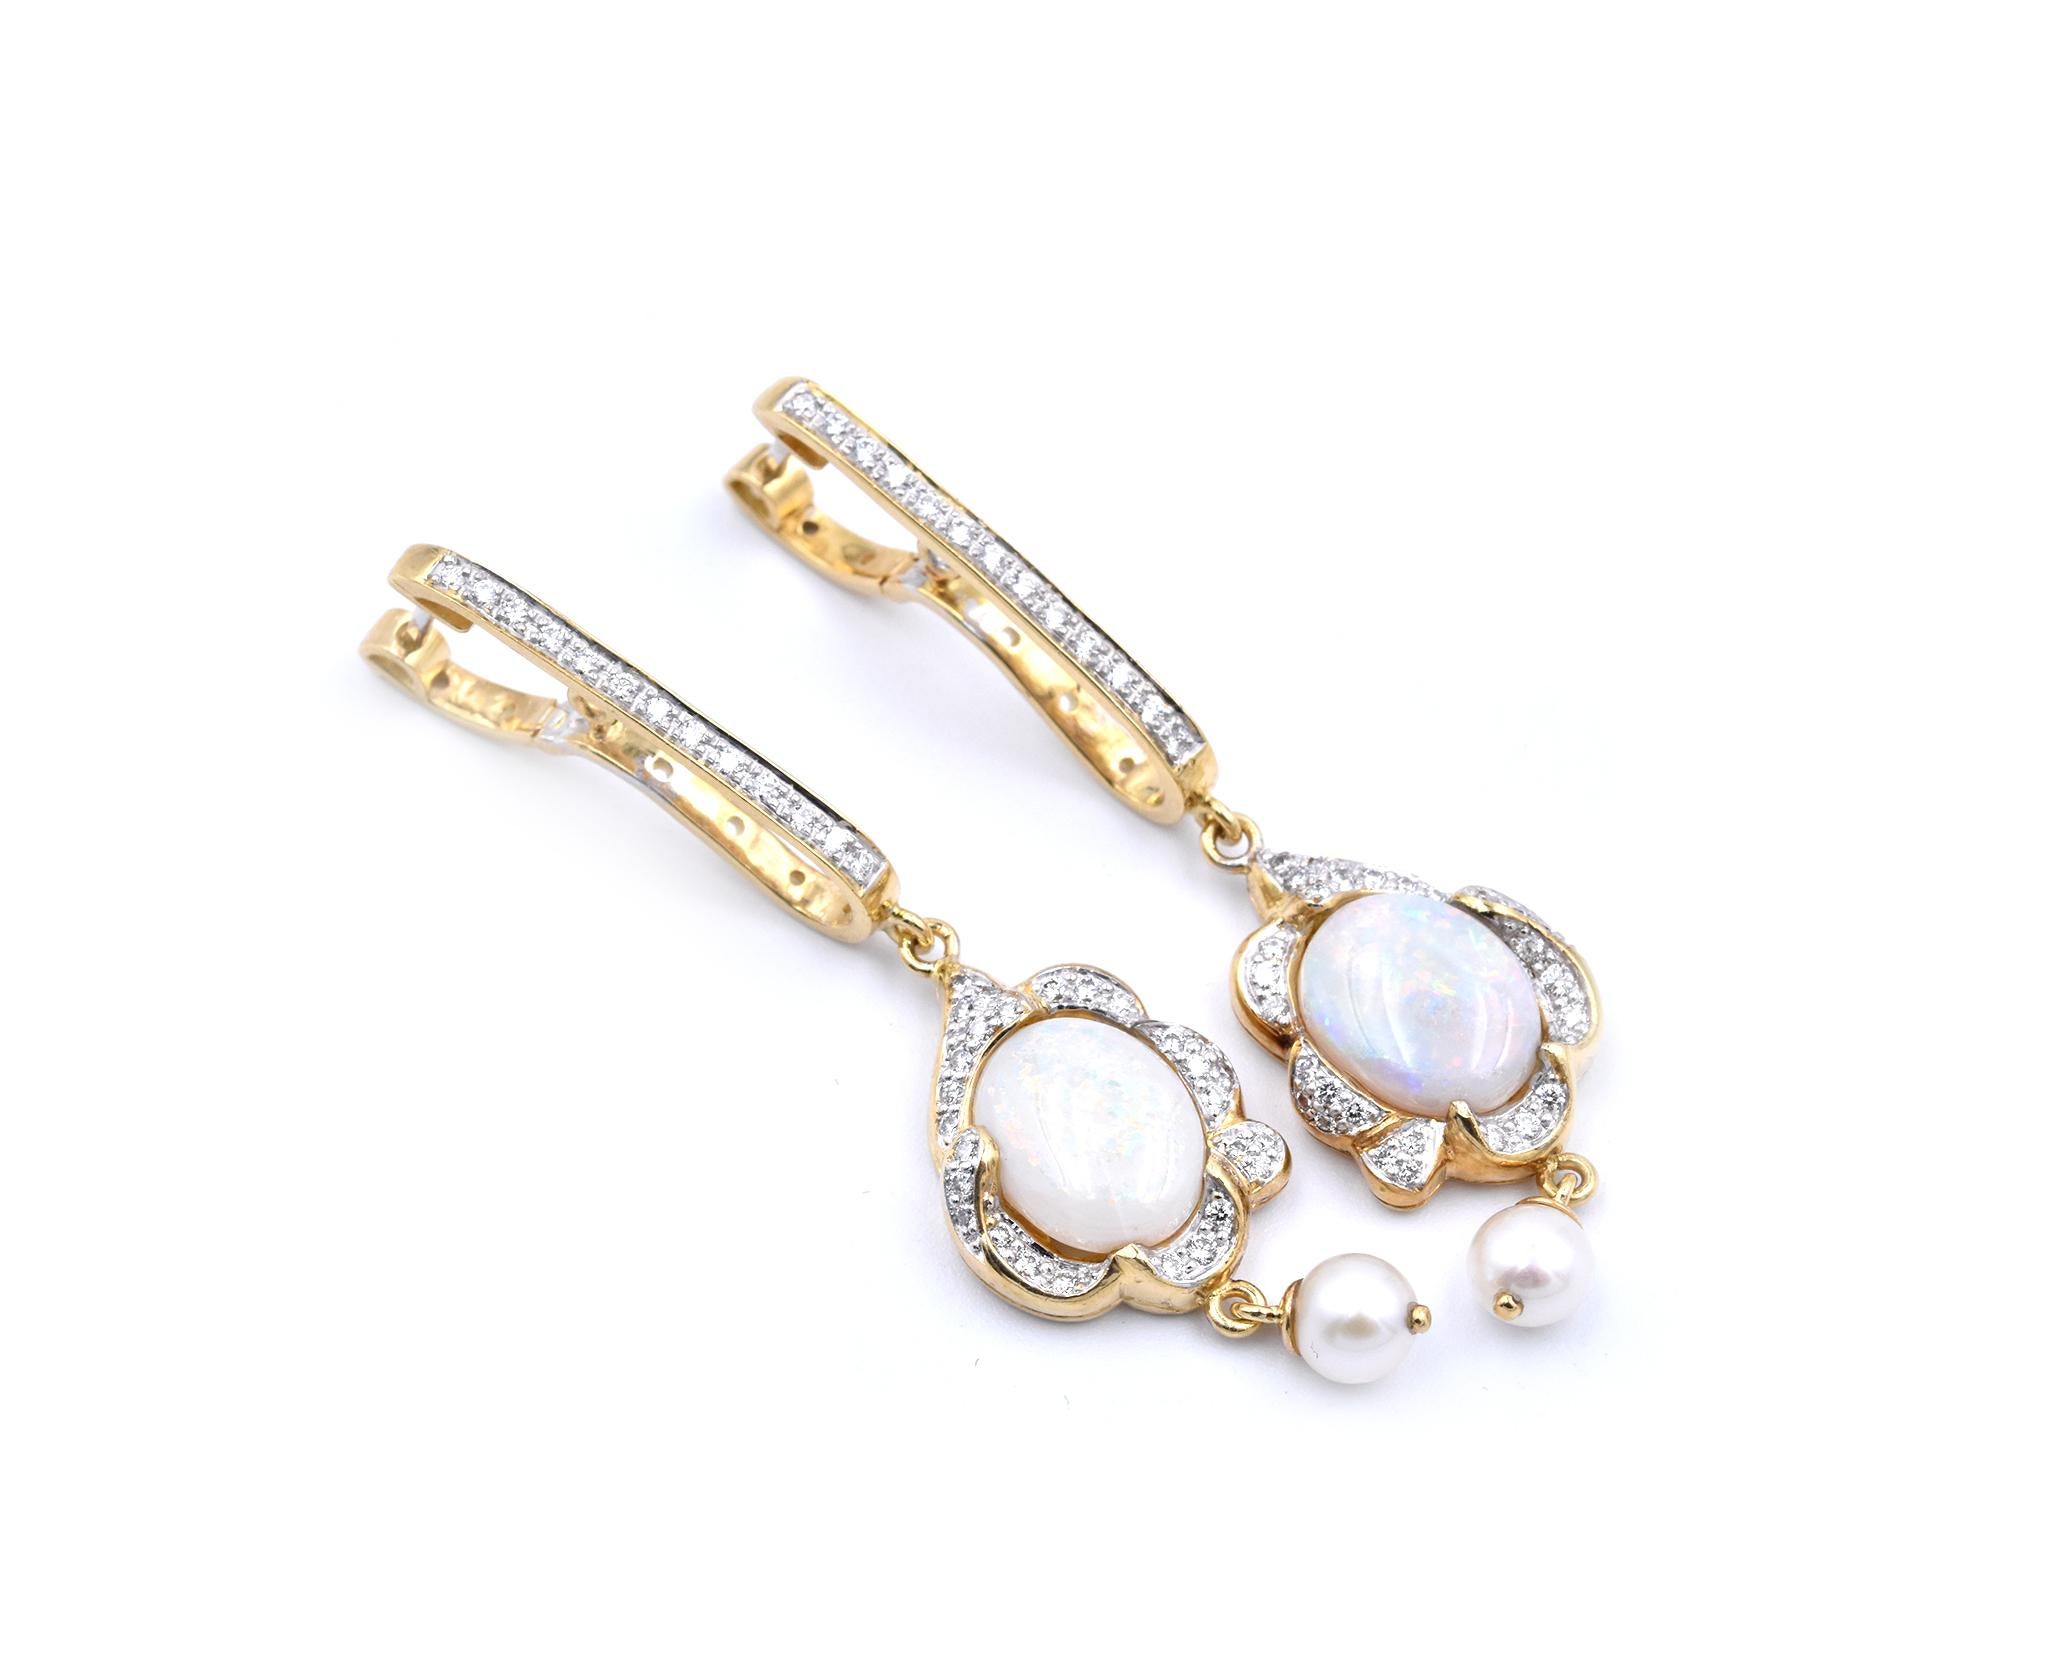 Designer: Customs
Material: 18k yellow gold
Opal: 2 oval cut opals
Diamonds: 54 round brilliant cuts = 0.54cttw
Dimensions: earrings measure 13.80mm x 56.55mm
Fastenings: snap closure
Weight: 13.46 grams